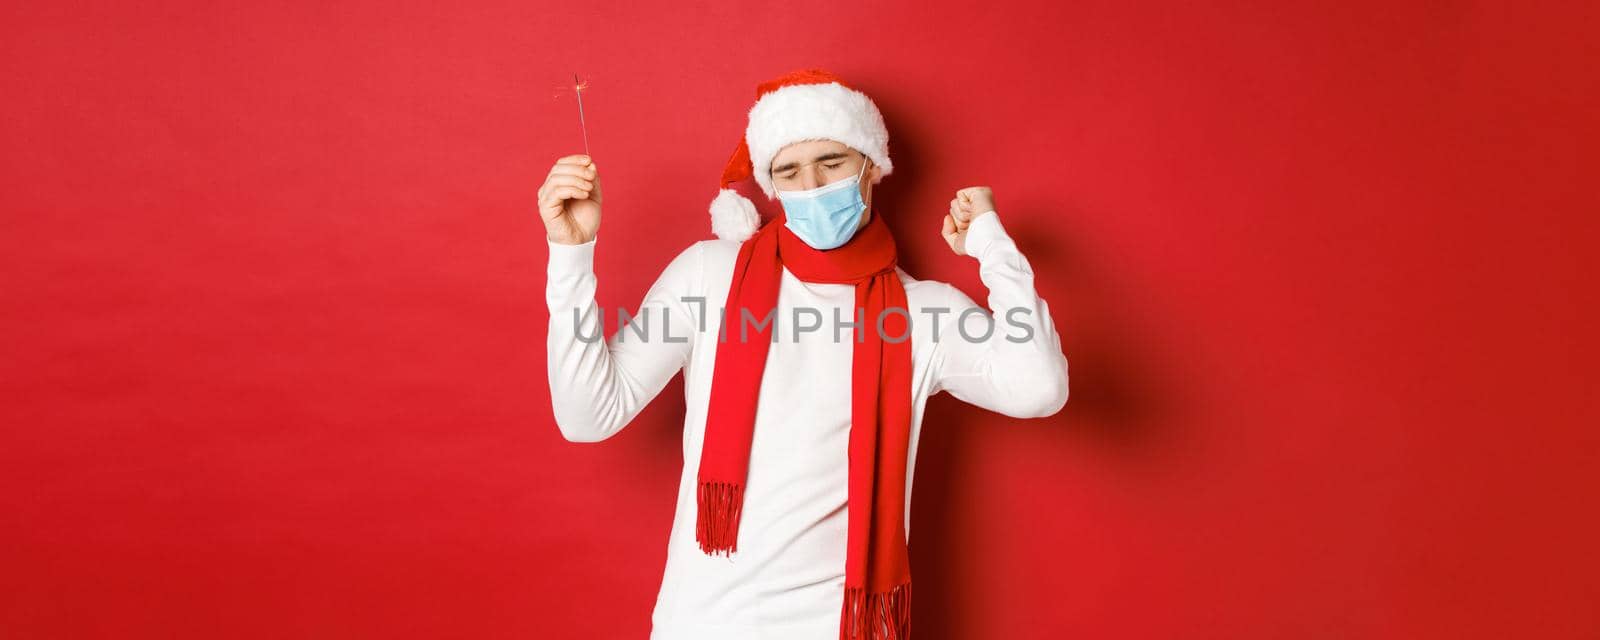 Concept of covid-19, christmas and holidays during pandemic. Happy man celebrating new year at party, wearing medical mask and santa hat, dancing with sparkler against red background.